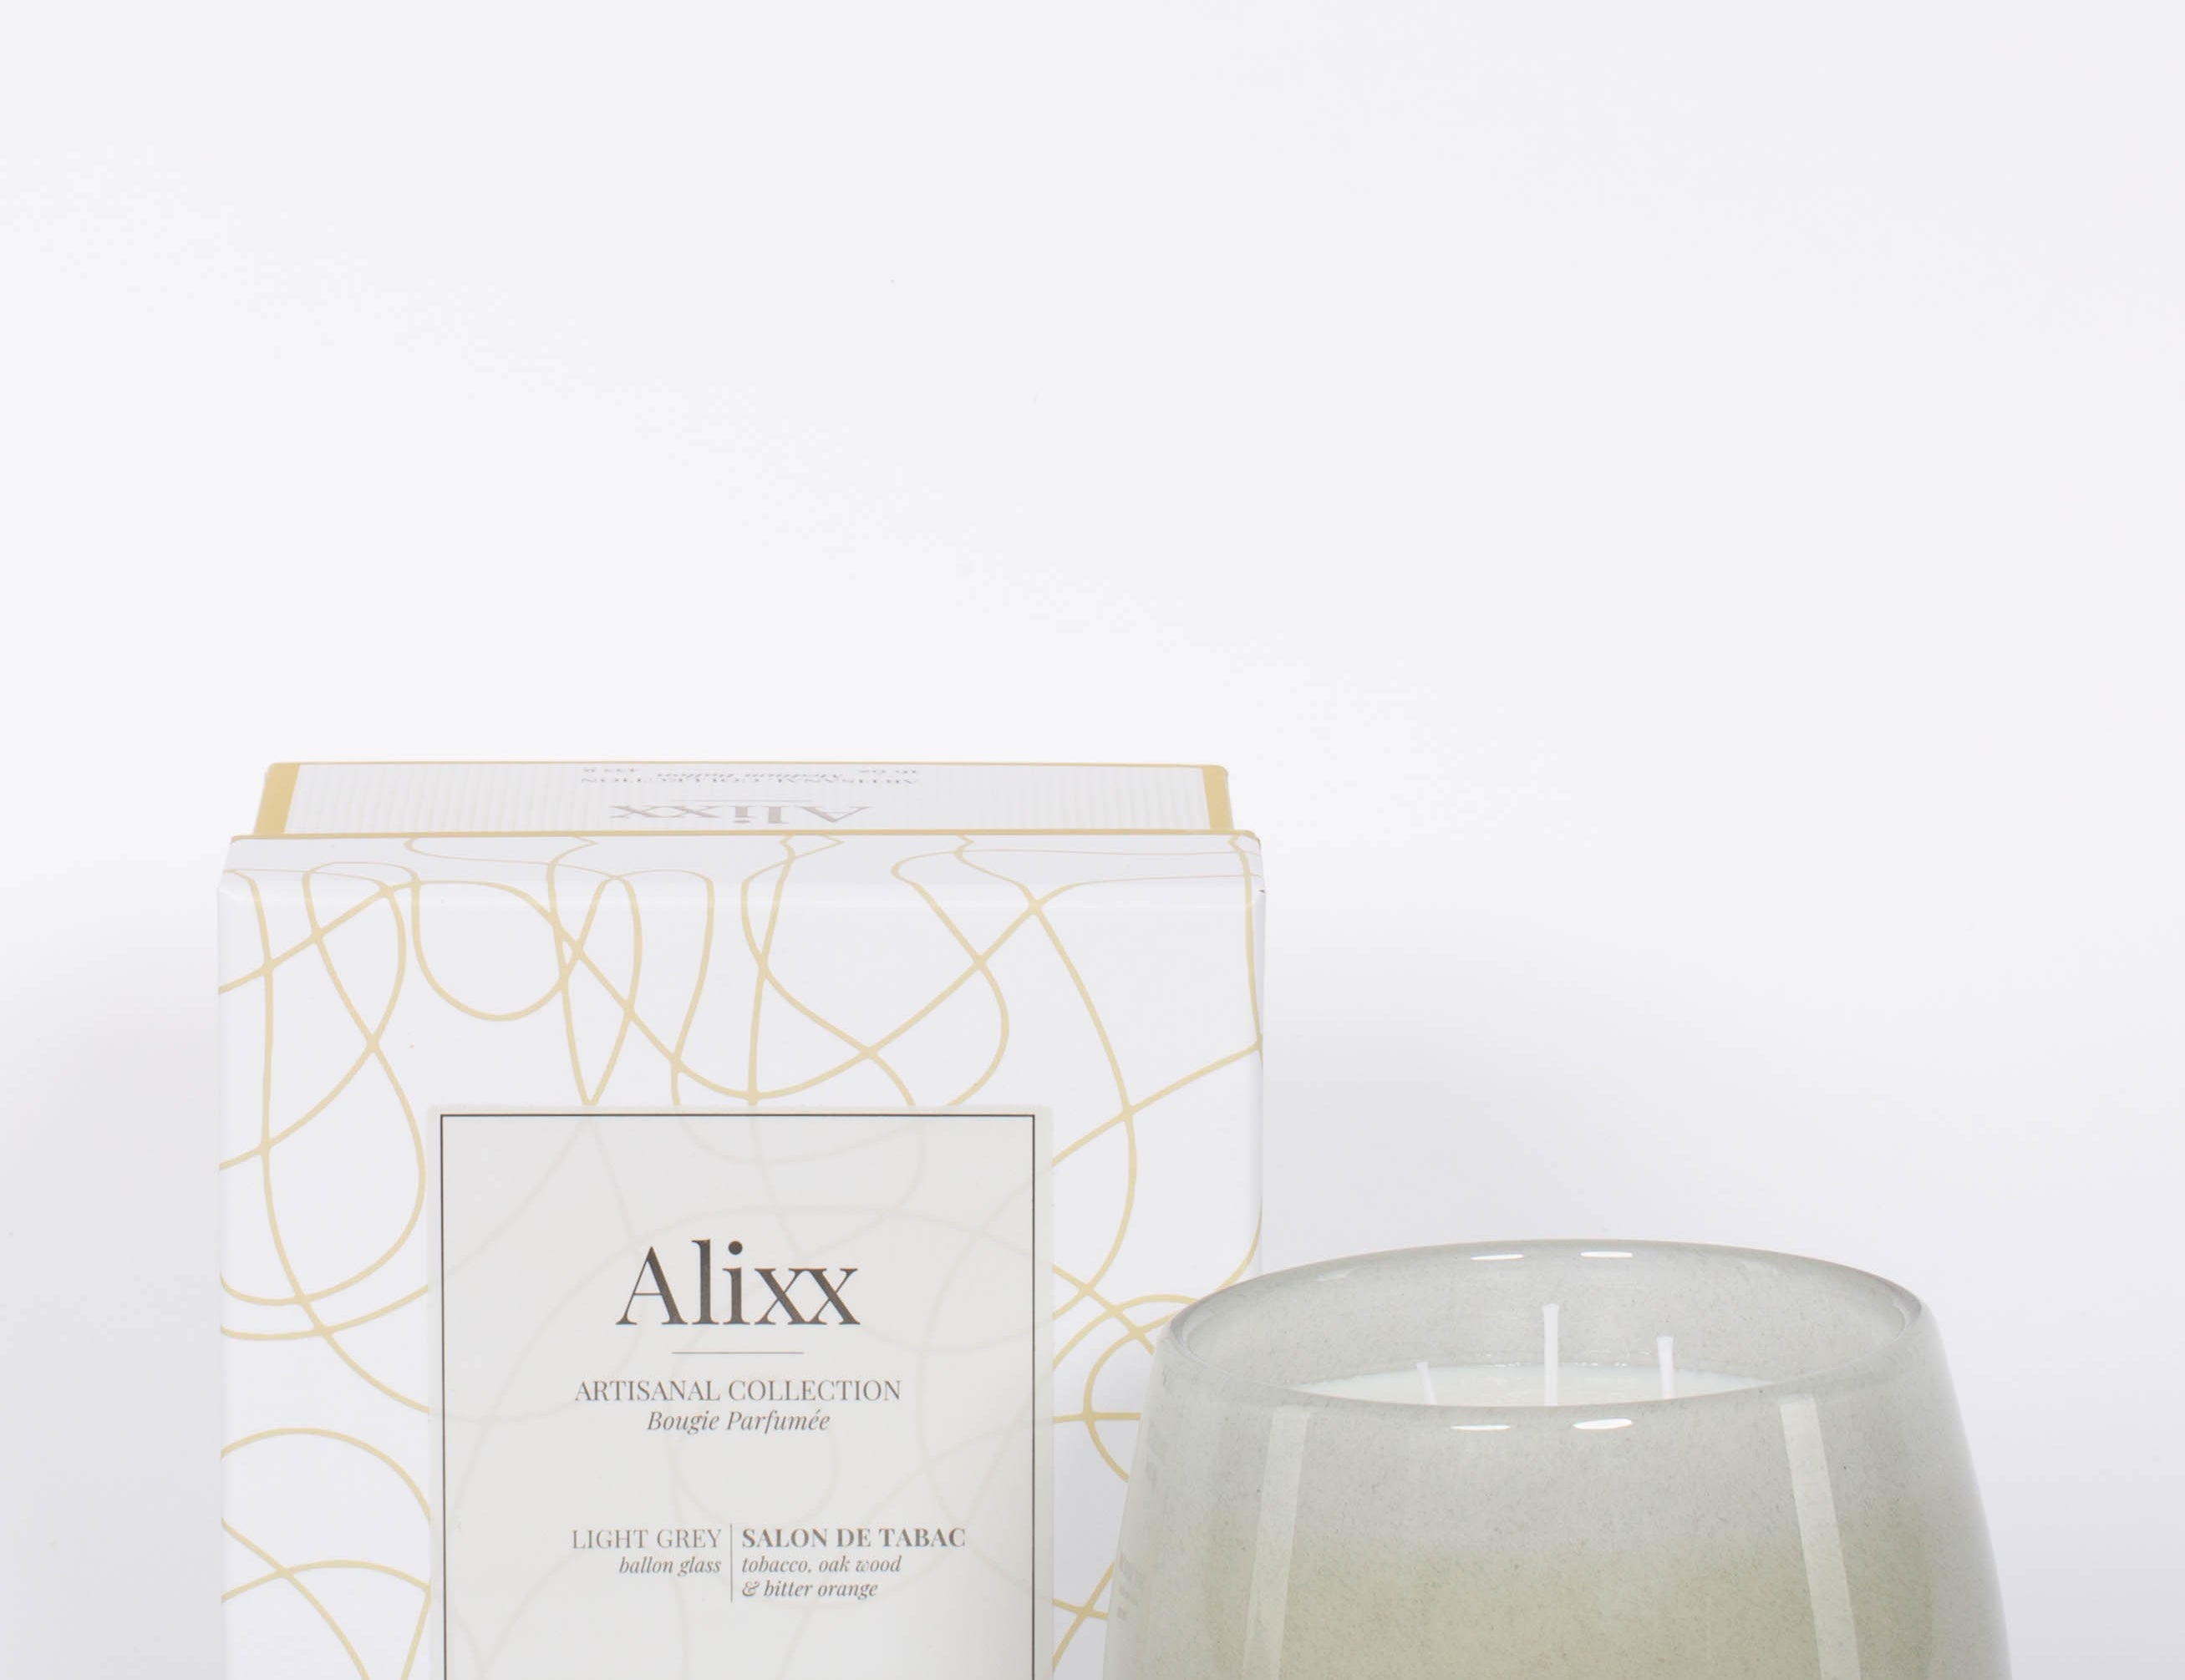 Paris inspired Salon De Tabac white two wick candle by Alixx with earthy oak wood, warm bourbon, and sweet plum nectar fragrance.  White and gold packaging box.